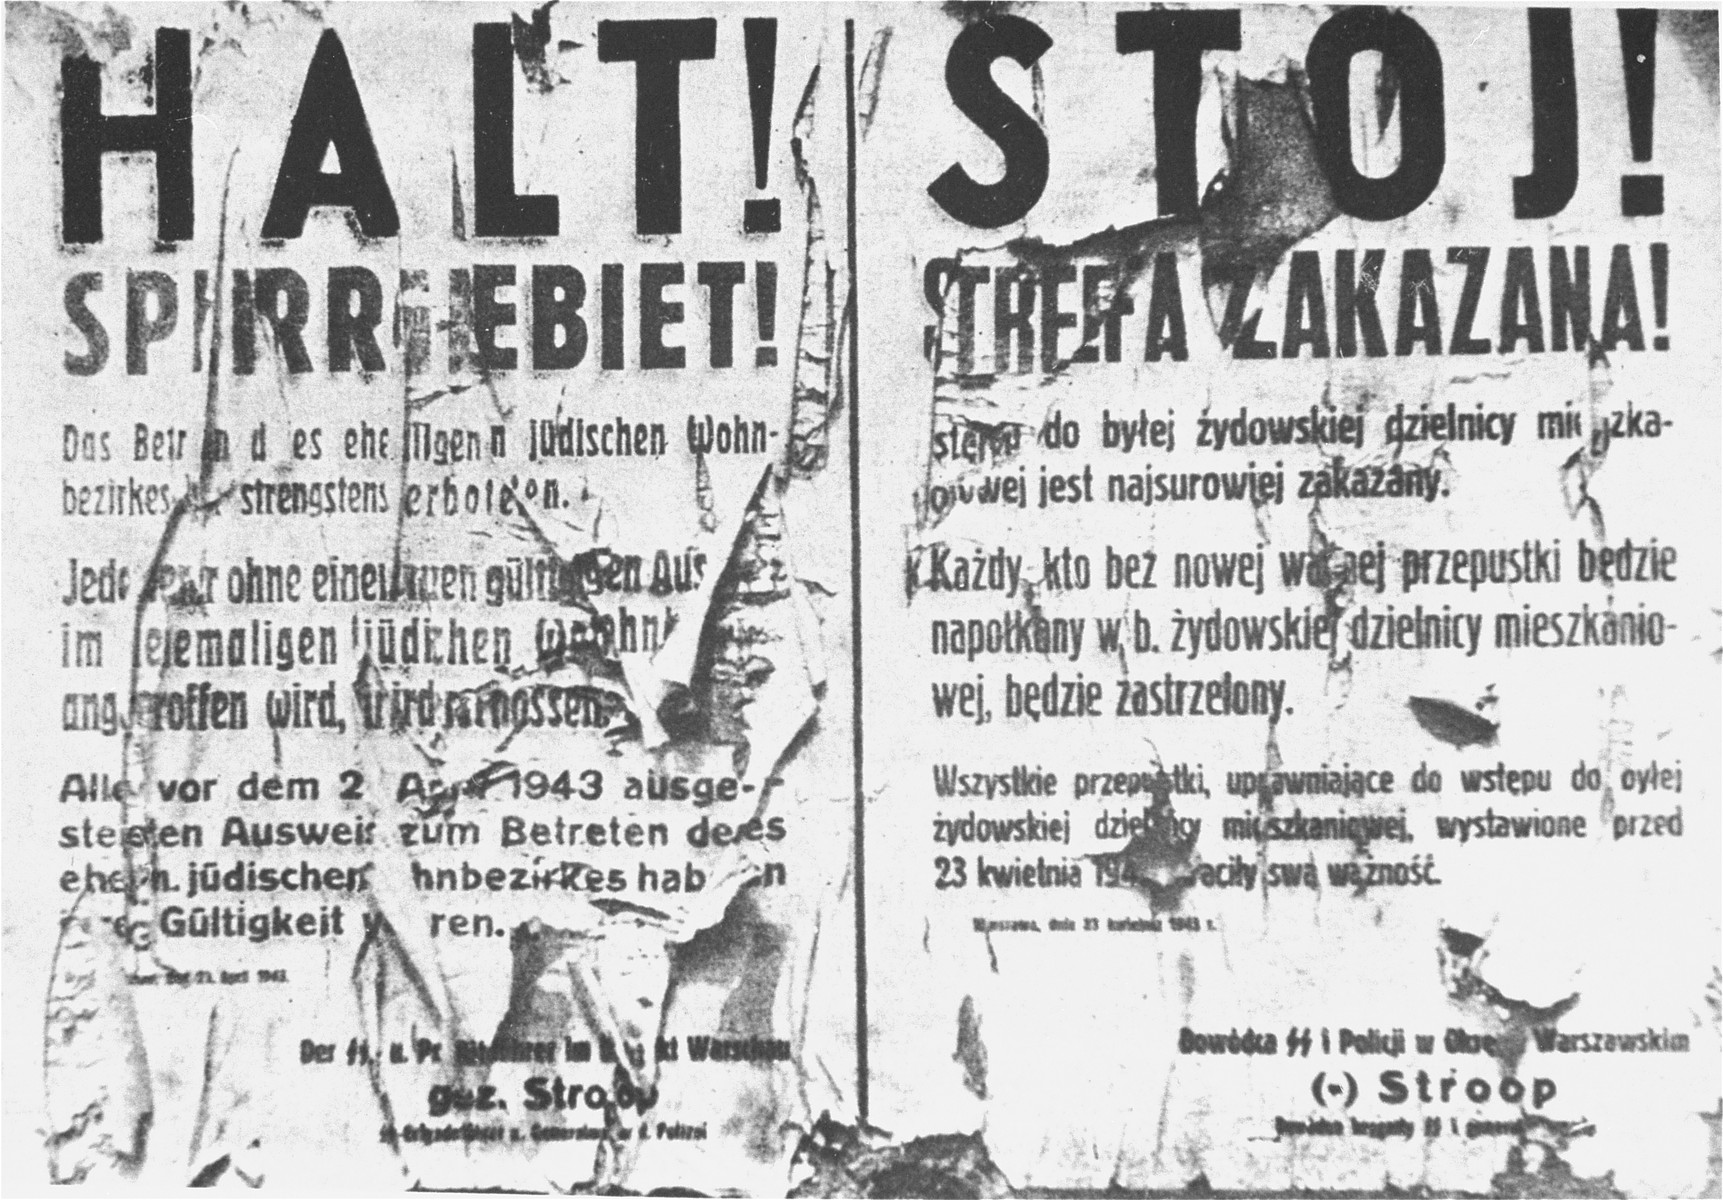 An announcement posted several days after the beginning of the Warsaw ghetto uprising on the order of SS Major General Juergen Stroop which forbids entrance to the ghetto under punishment of death.  All permits issued before 23 April 1943 are declared void.